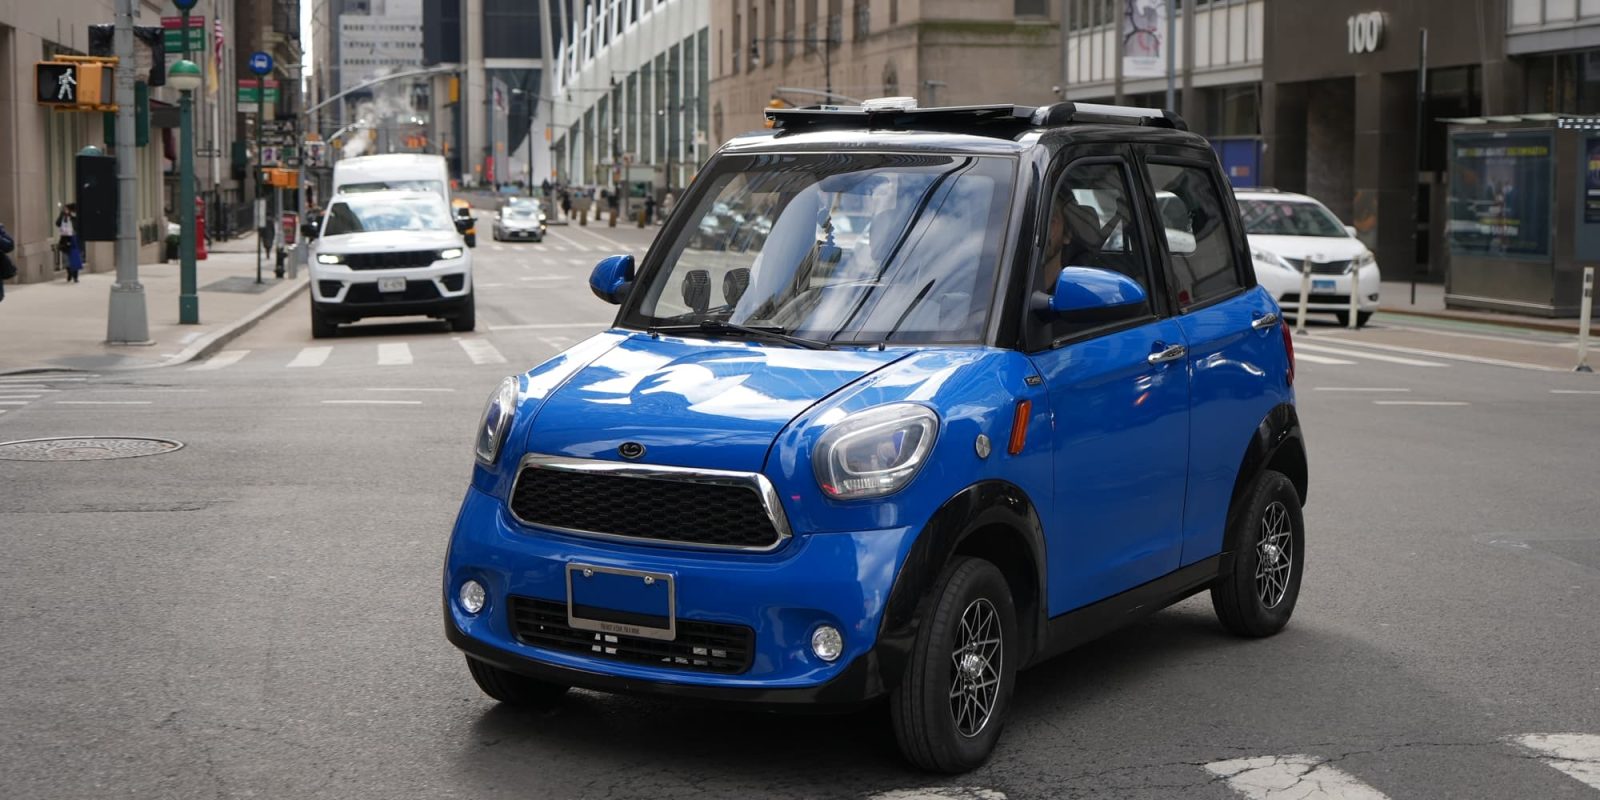 The US’s solely electrical street-legal microcar